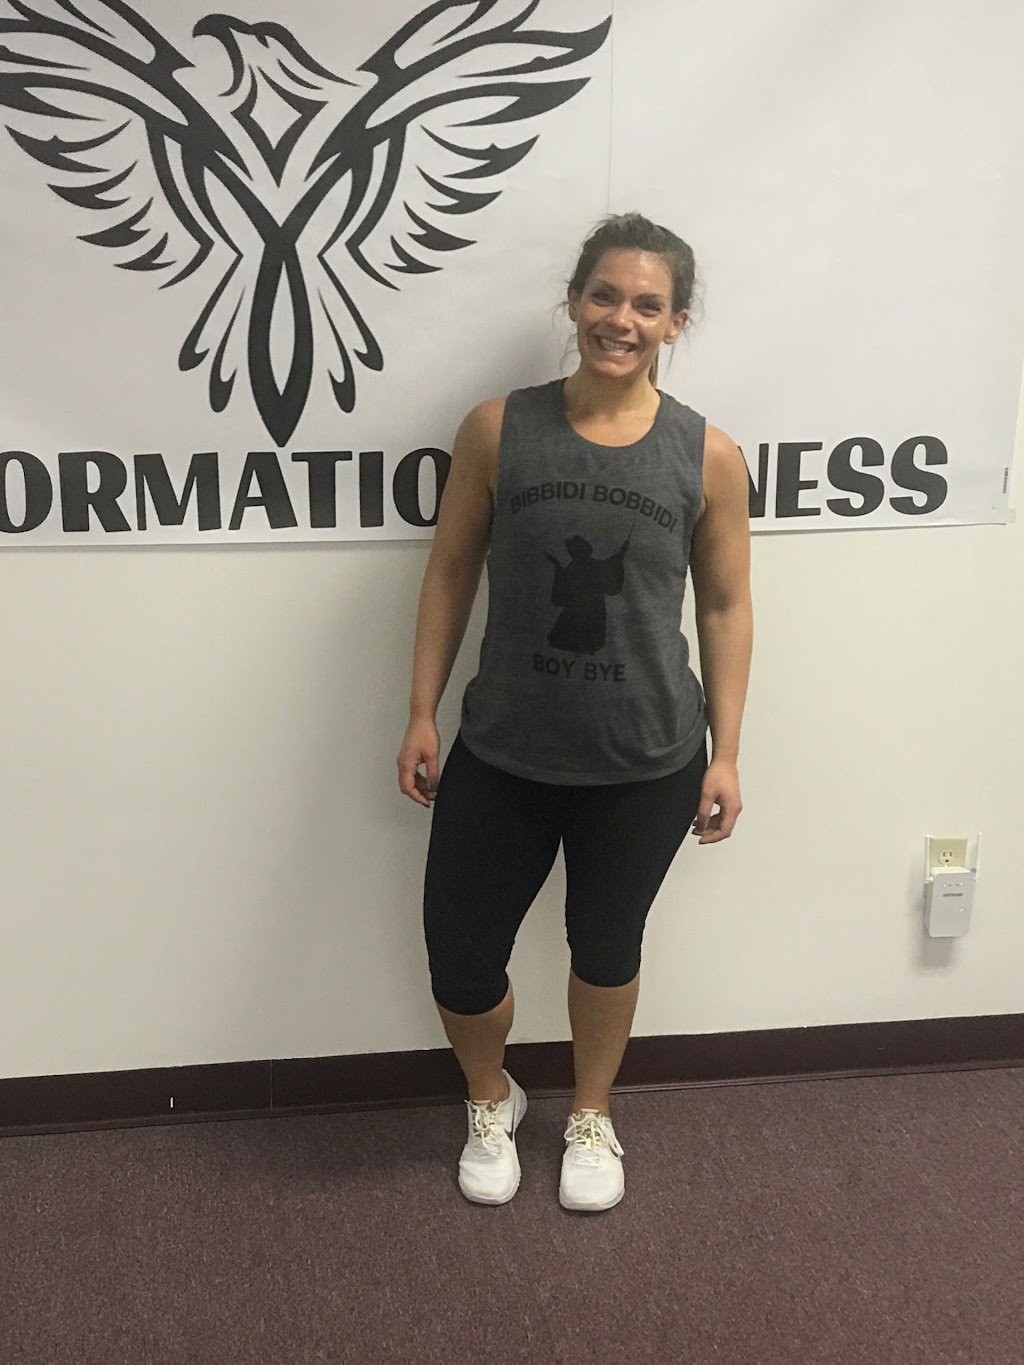 Transformation fitness With T | 14 Strawberry Hill Ave, Norwalk, CT 06850 | Phone: (475) 988-4418